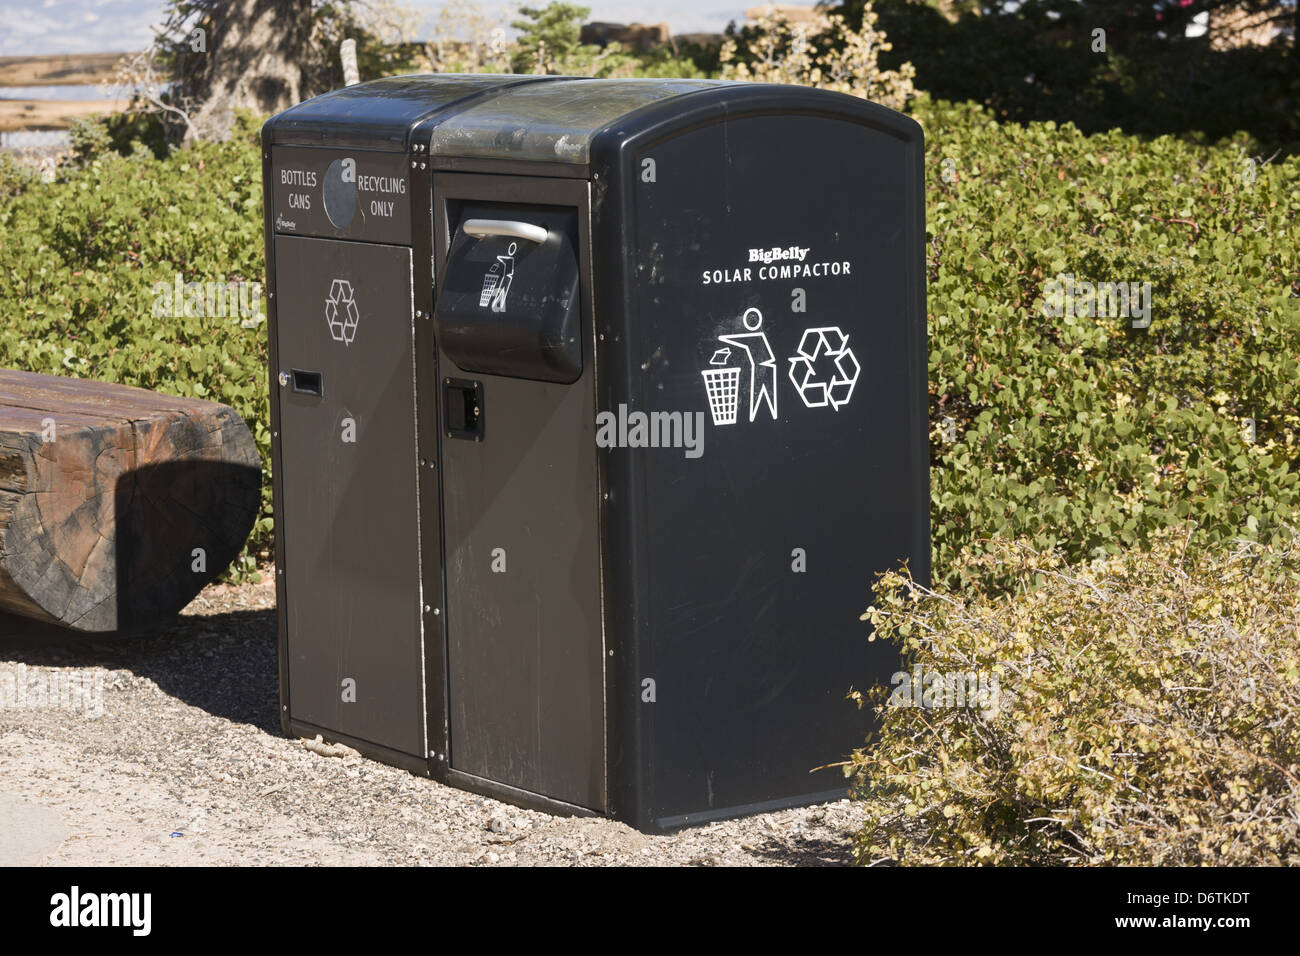 Solar-powered waste disposal containers and compactors, Bryce Canyon N.P., Utah, U.S.A., October Stock Photo